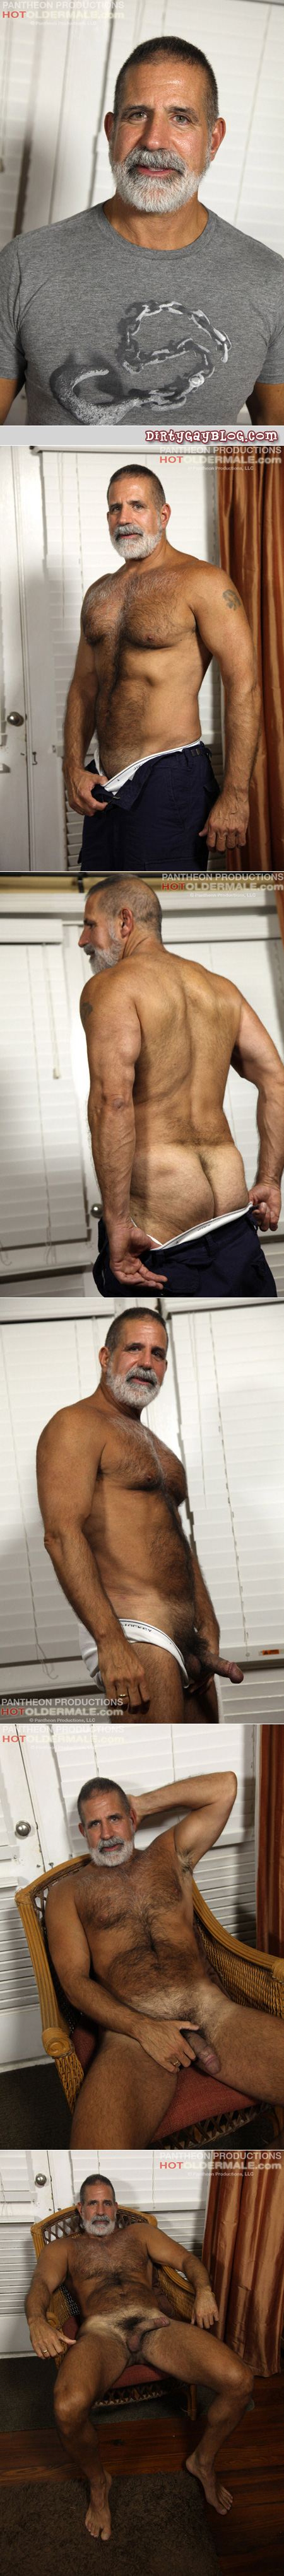 Hairy, beefy Daddy with tan lines jerks off for other guys to watch.